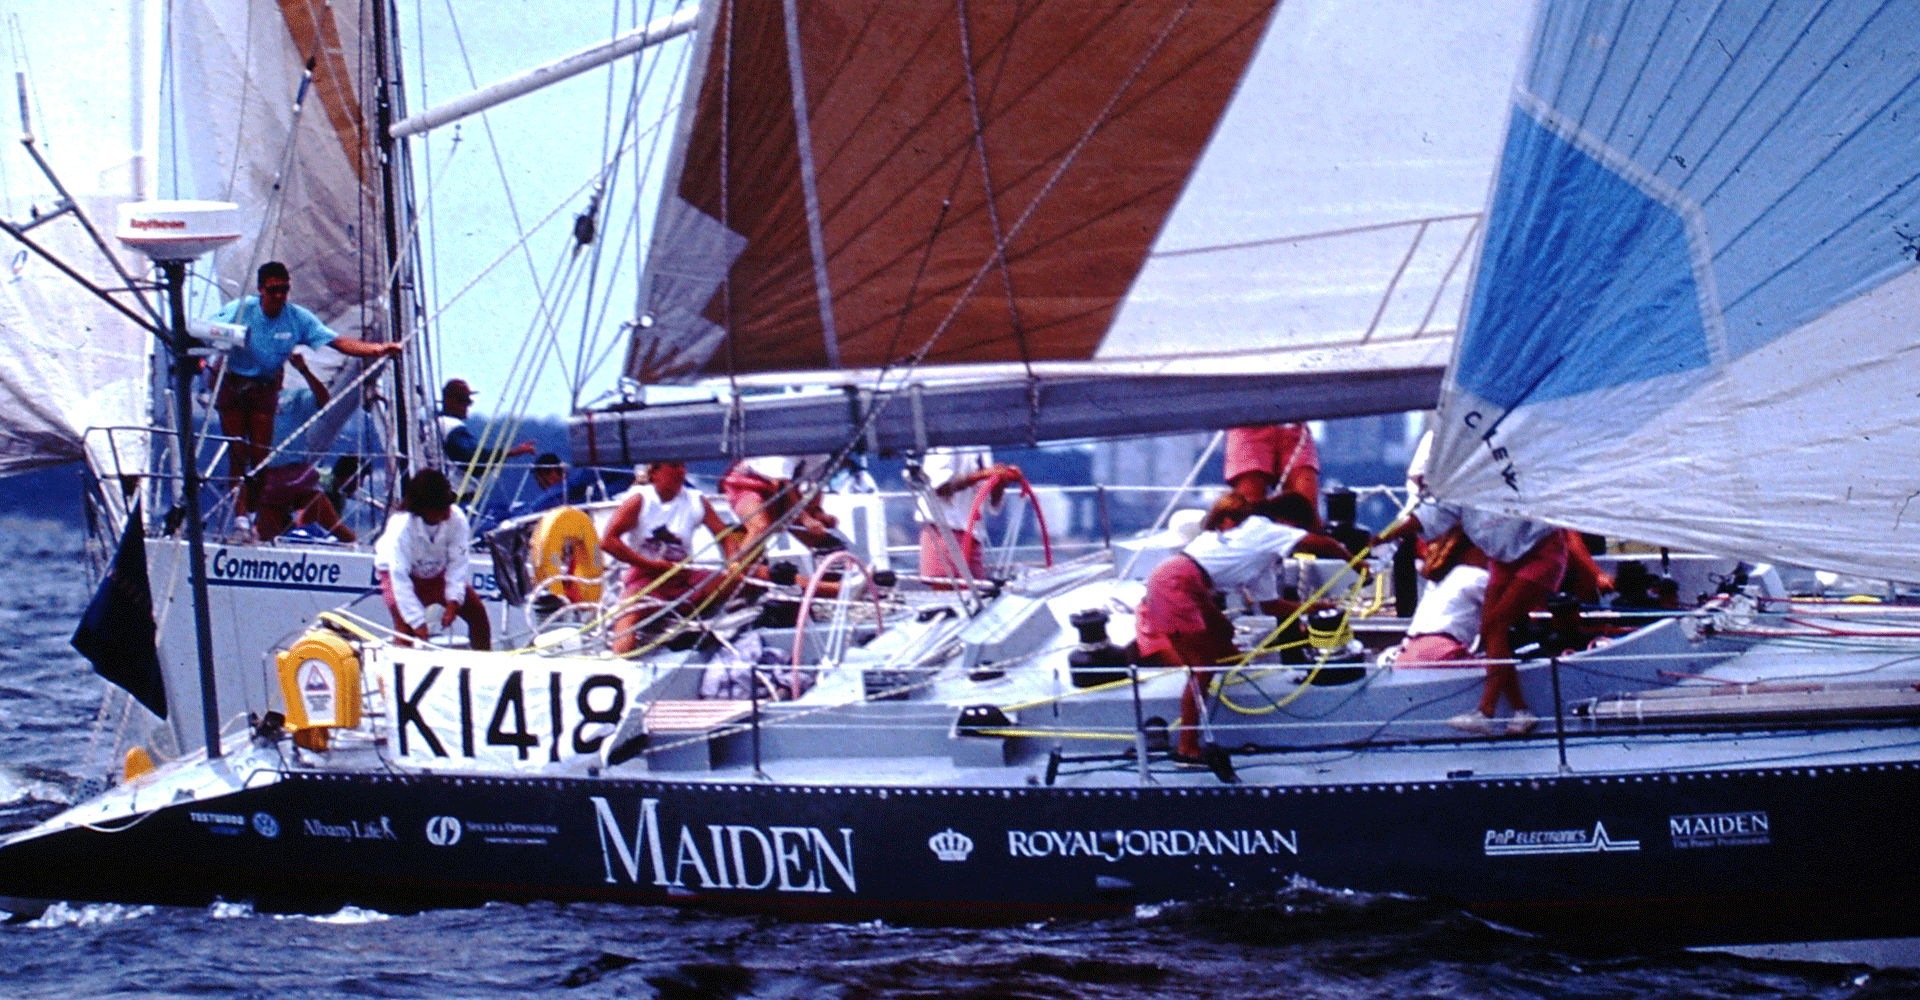 maiden an all-female yacht arrives to LA